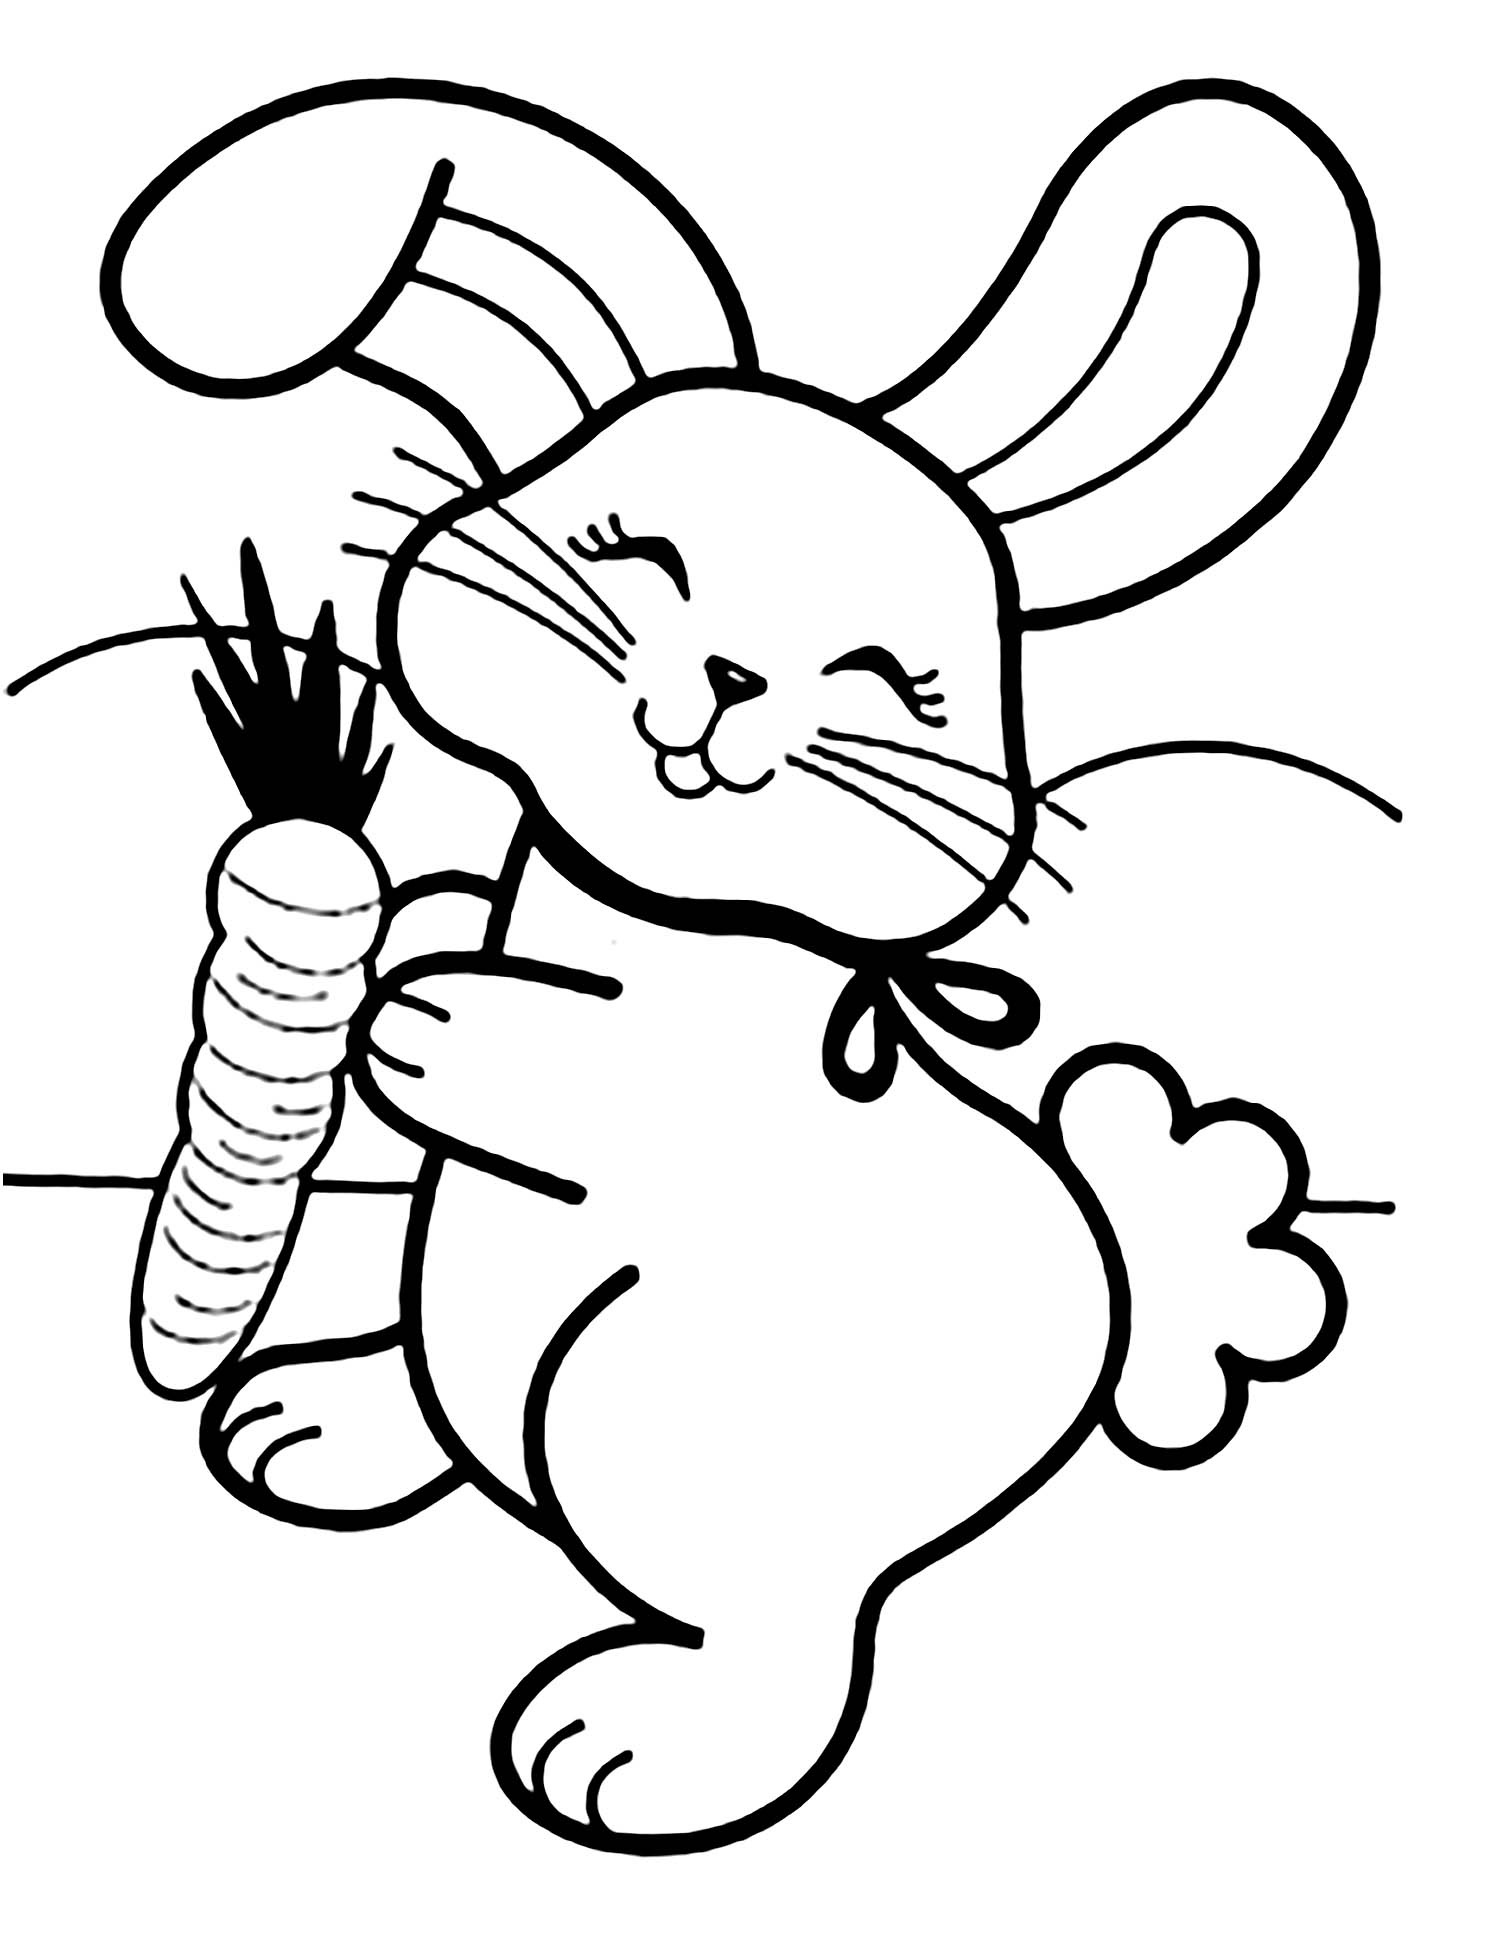 rabbit color page rabbits coloring pages realistic realistic coloring pages page color rabbit 